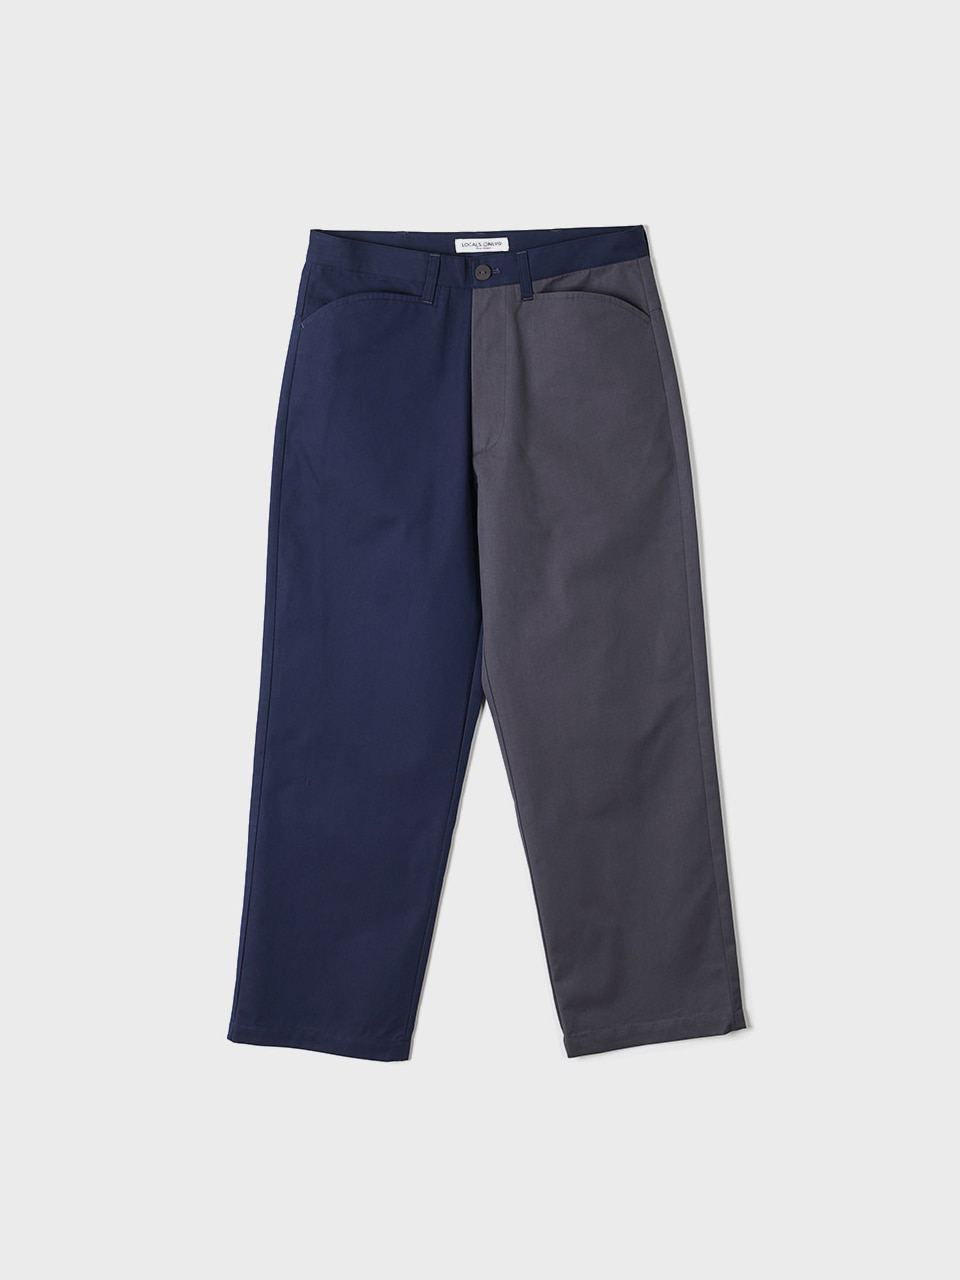 LOCALS ONLY Two Face Skater pants &quot;Navy/Charcoal&quot;